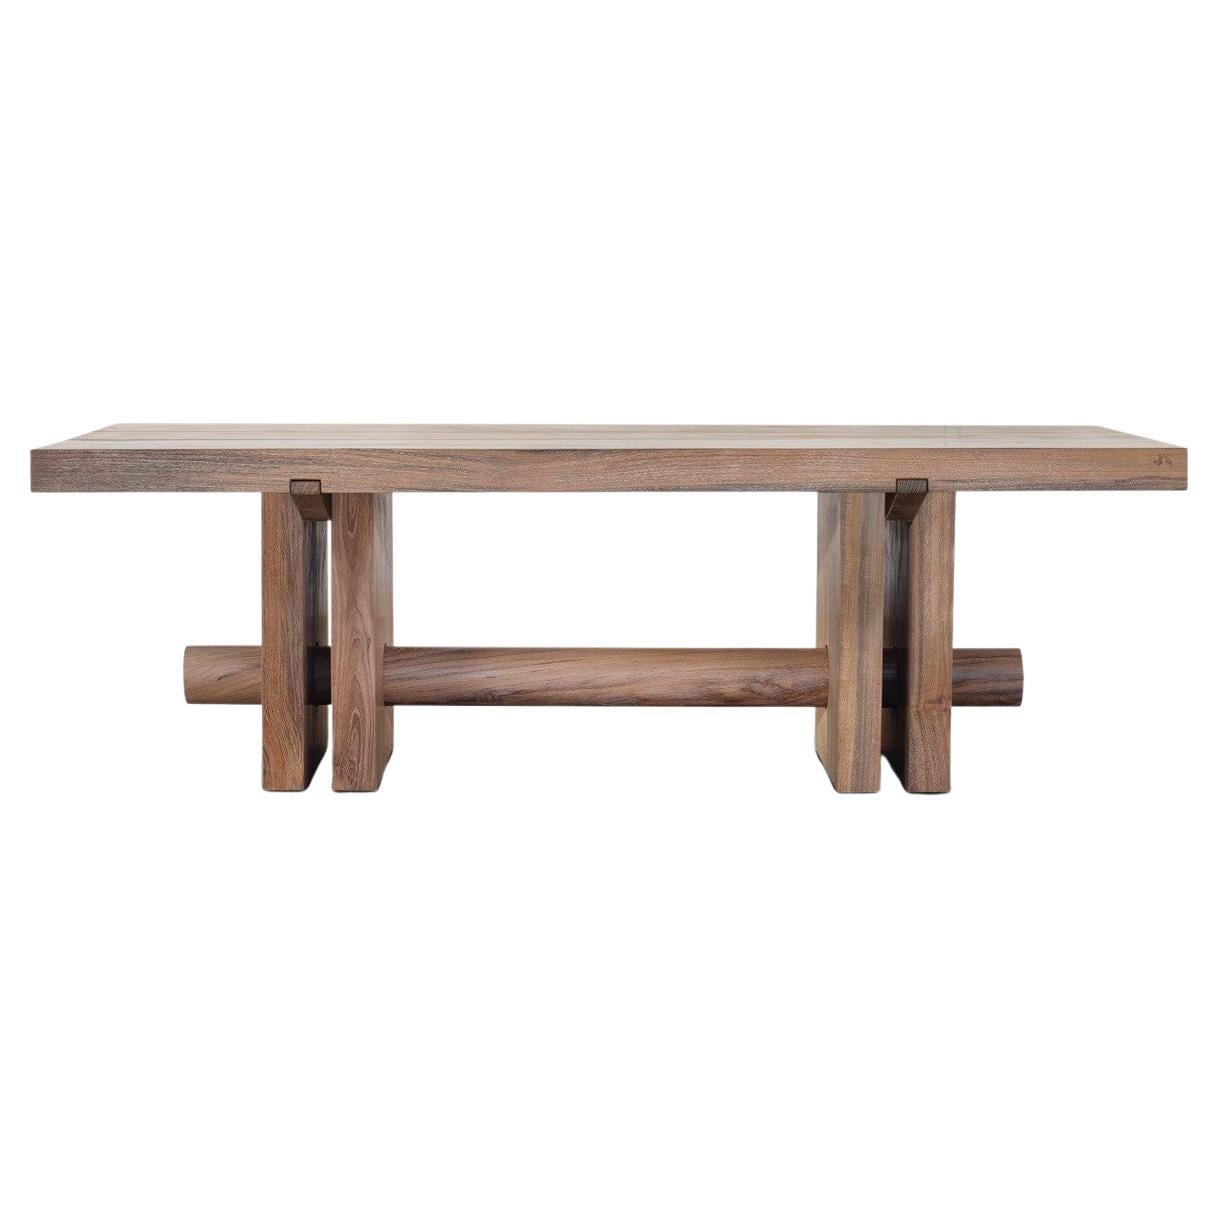 Rare dining table by Jerome Abel Seguin - Made with old javanase teak wood 